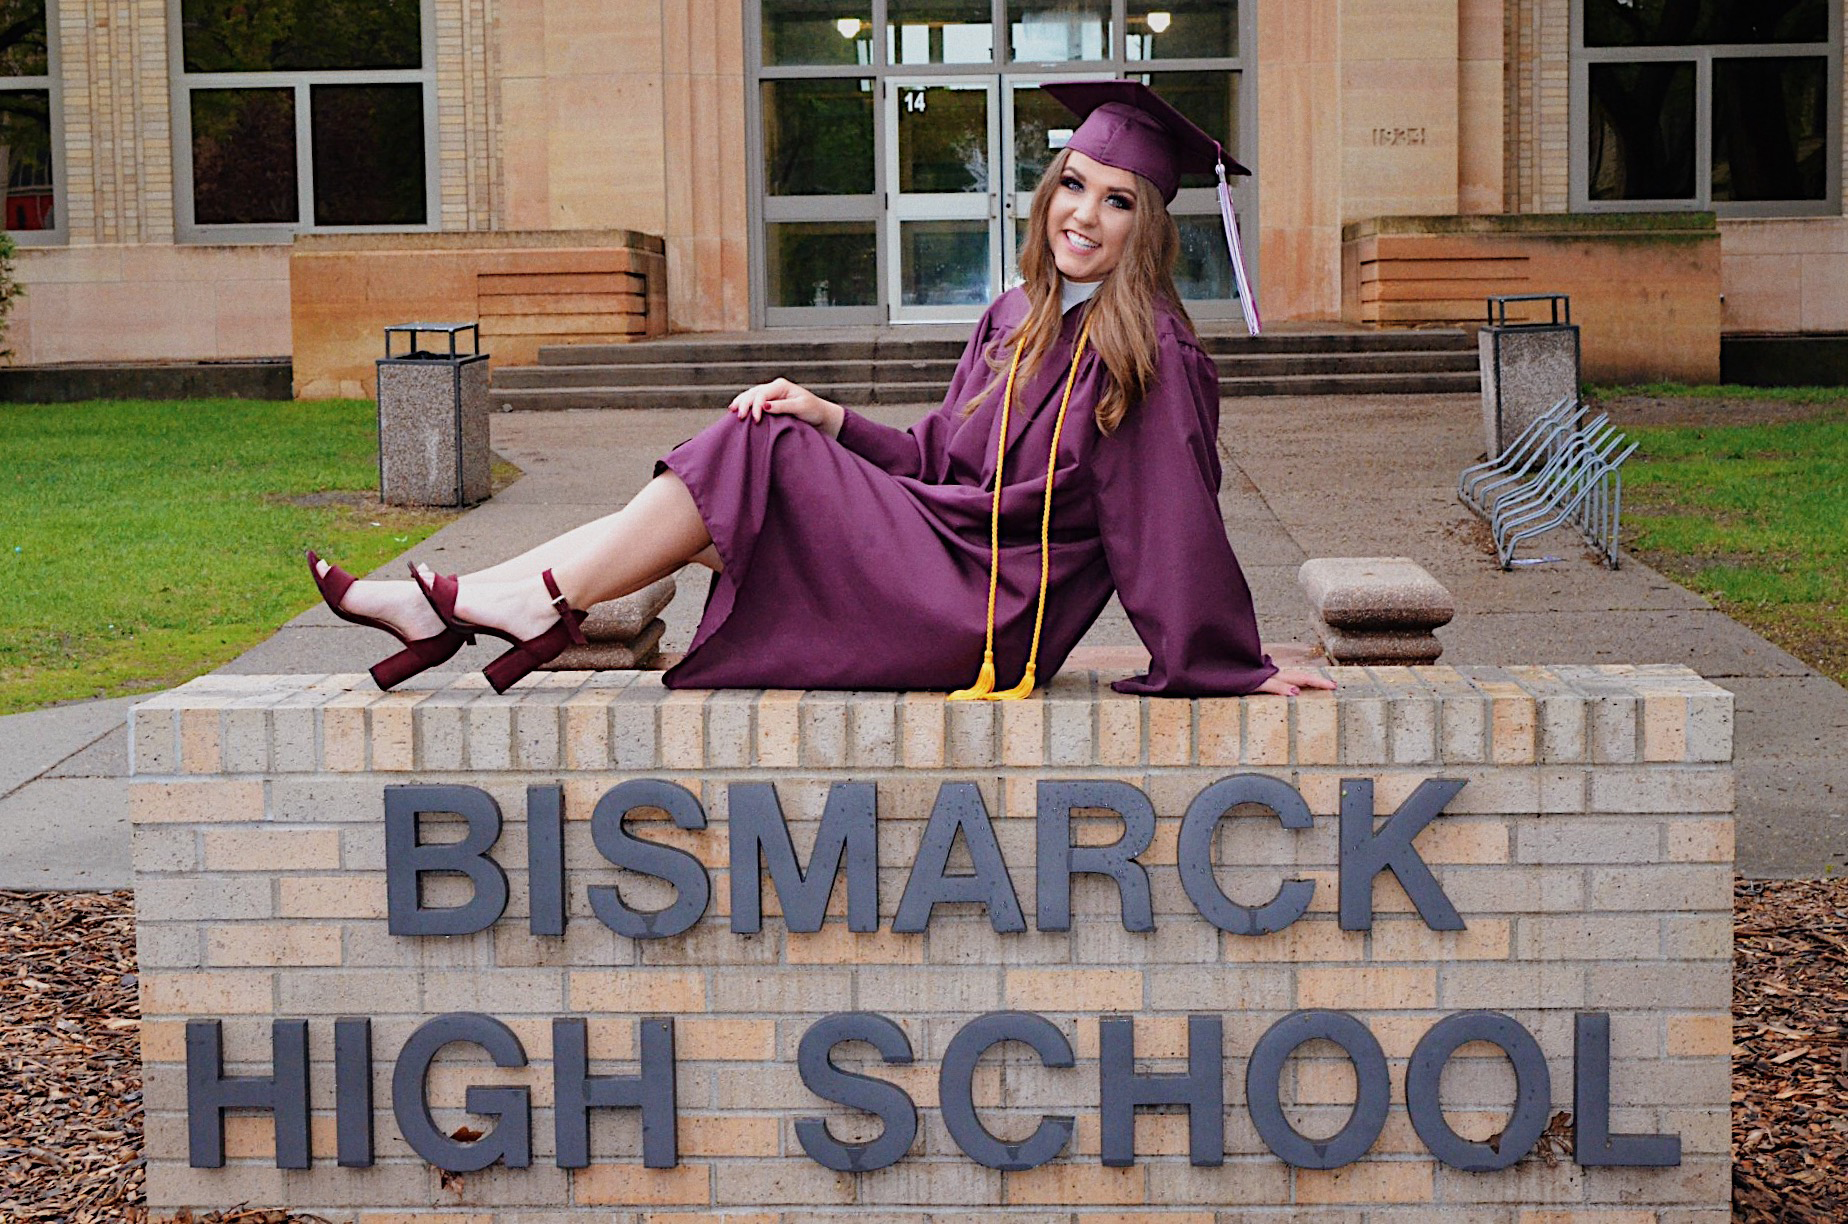 PHOTO: Sydney Helgeson performed an original song to the tune of "Shallow" for Bismark High School's graduation.